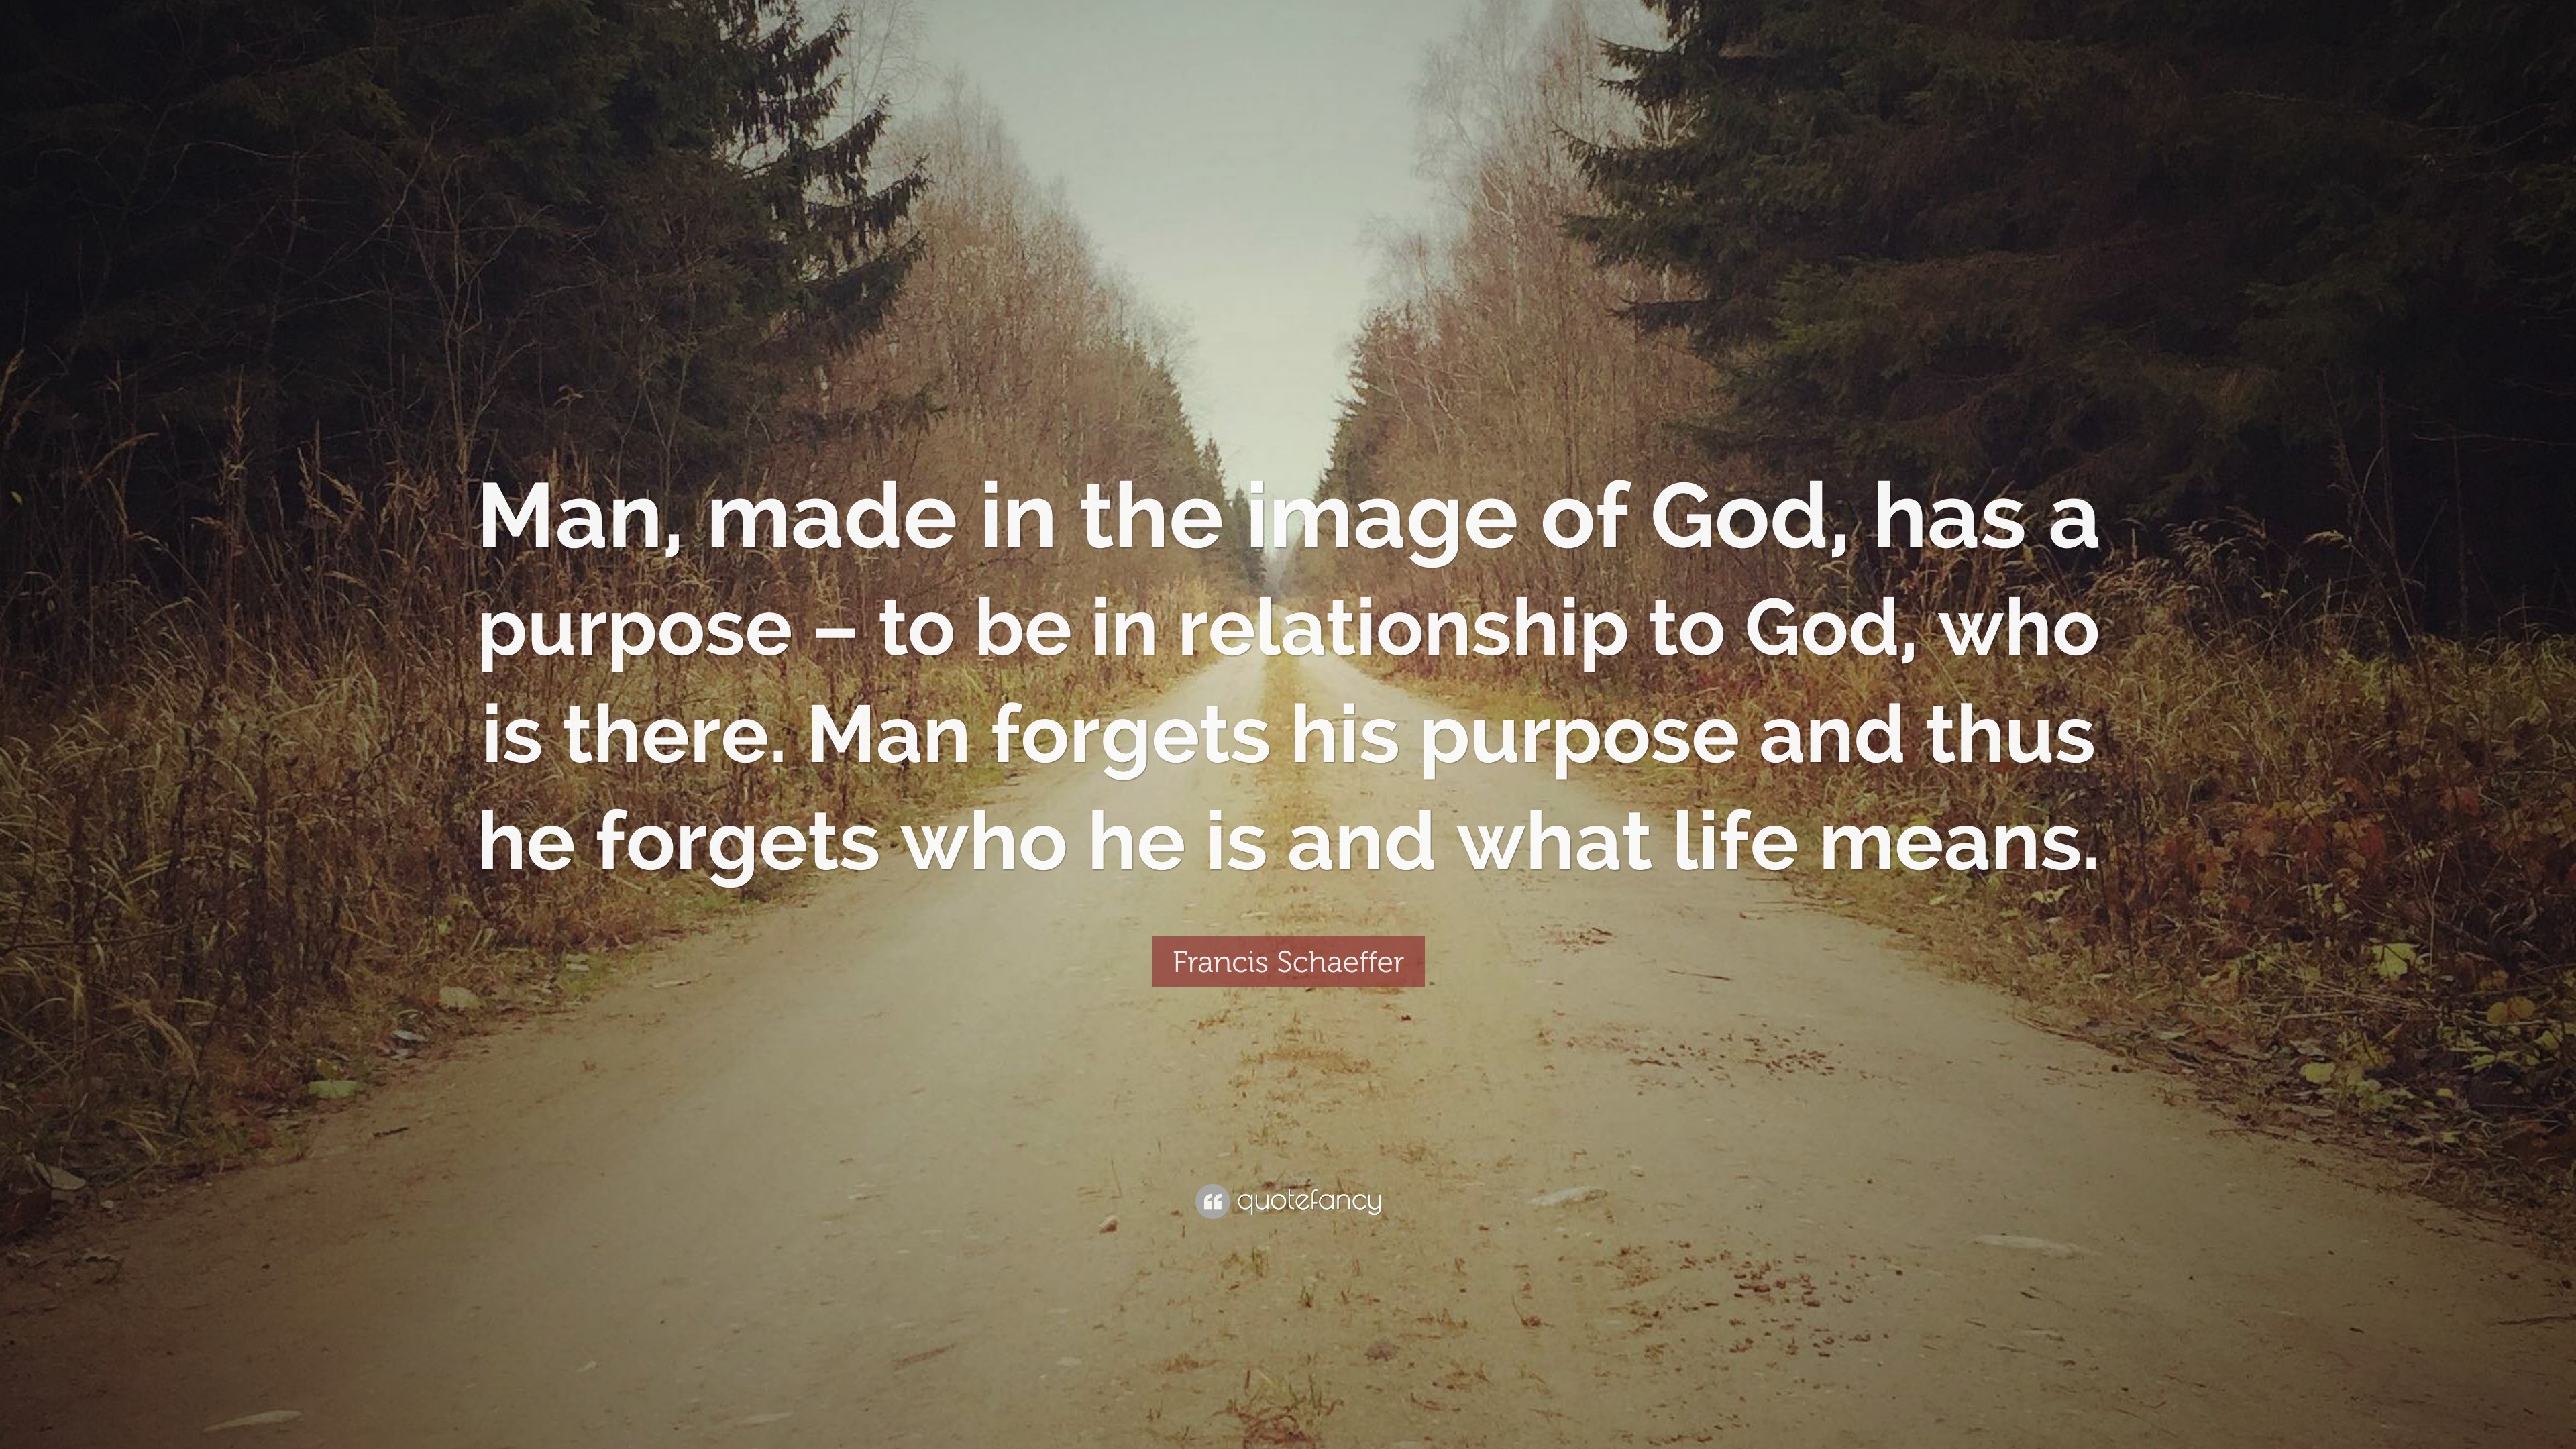 Francis Schaeffer Quote: “Man, made in the image of God, has a purpose